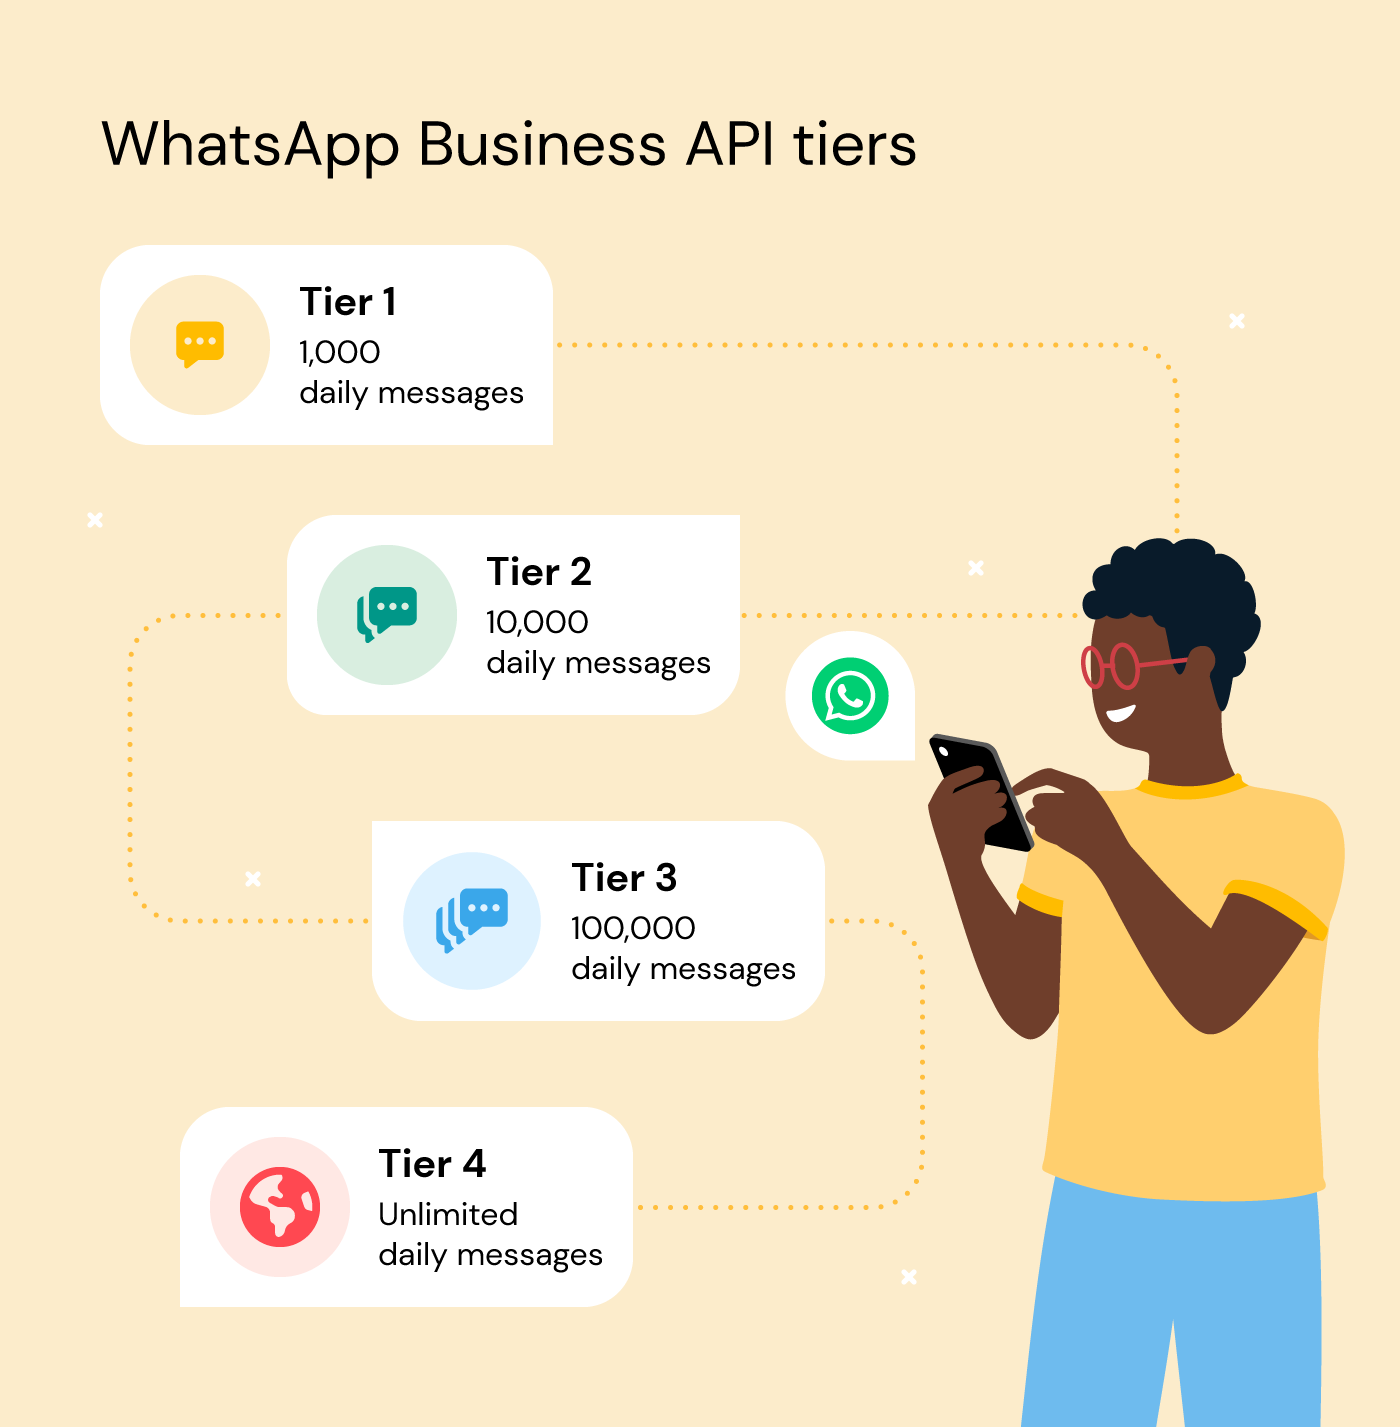 WhatsApp Business API tiers: 1-1,000 daily messages; 2-10,000 daily messages; 3-100,000 daily messages, 4-unlimited daily messages